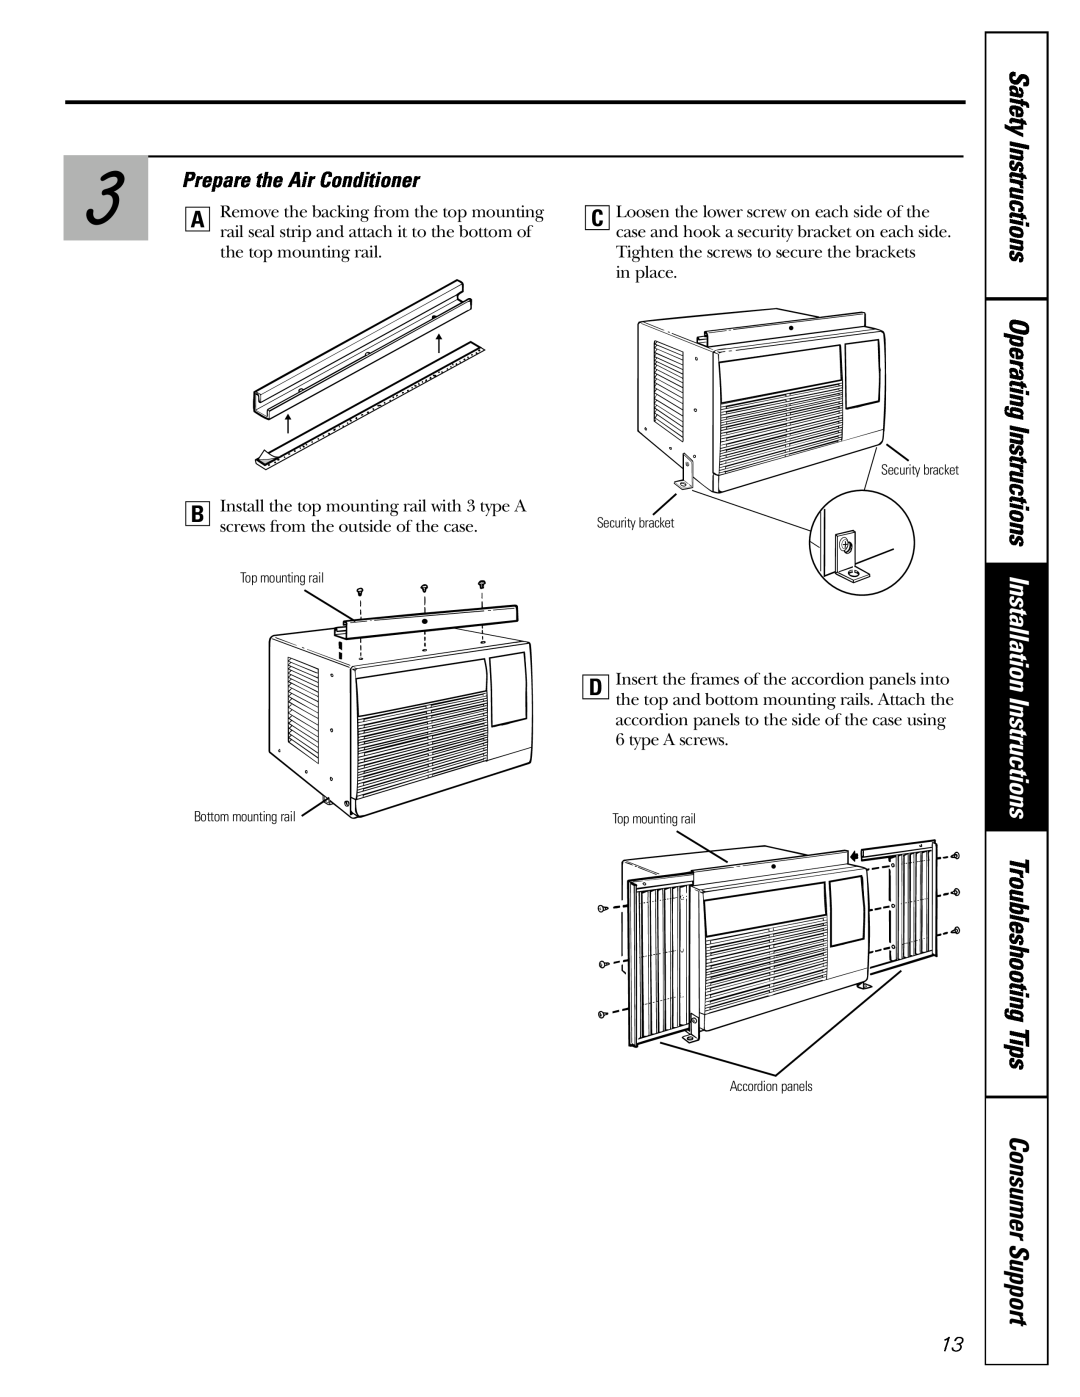 GE ASR05 installation instructions Safety Instructions Operating, Prepare the Air Conditioner 